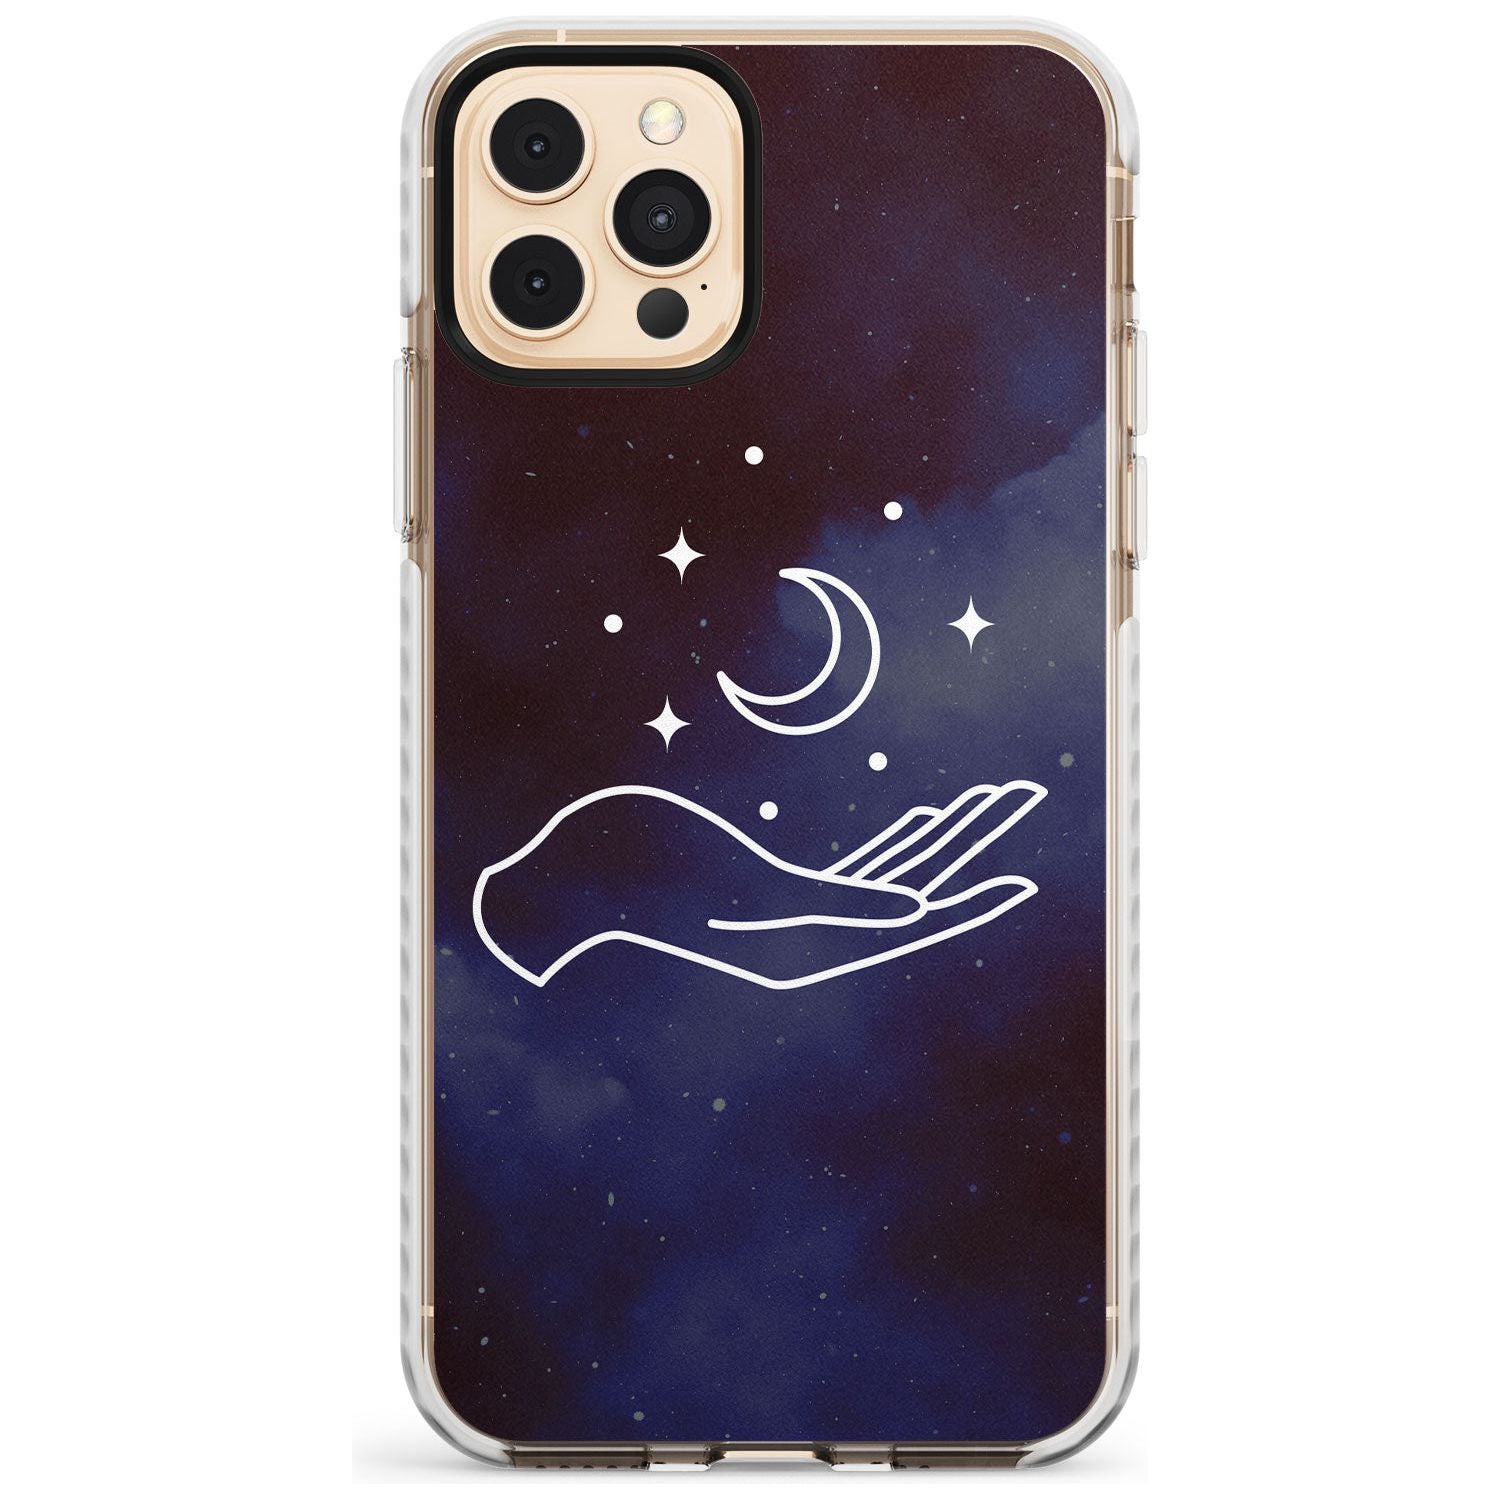 Floating Moon Above Hand Slim TPU Phone Case for iPhone 11 Pro Max